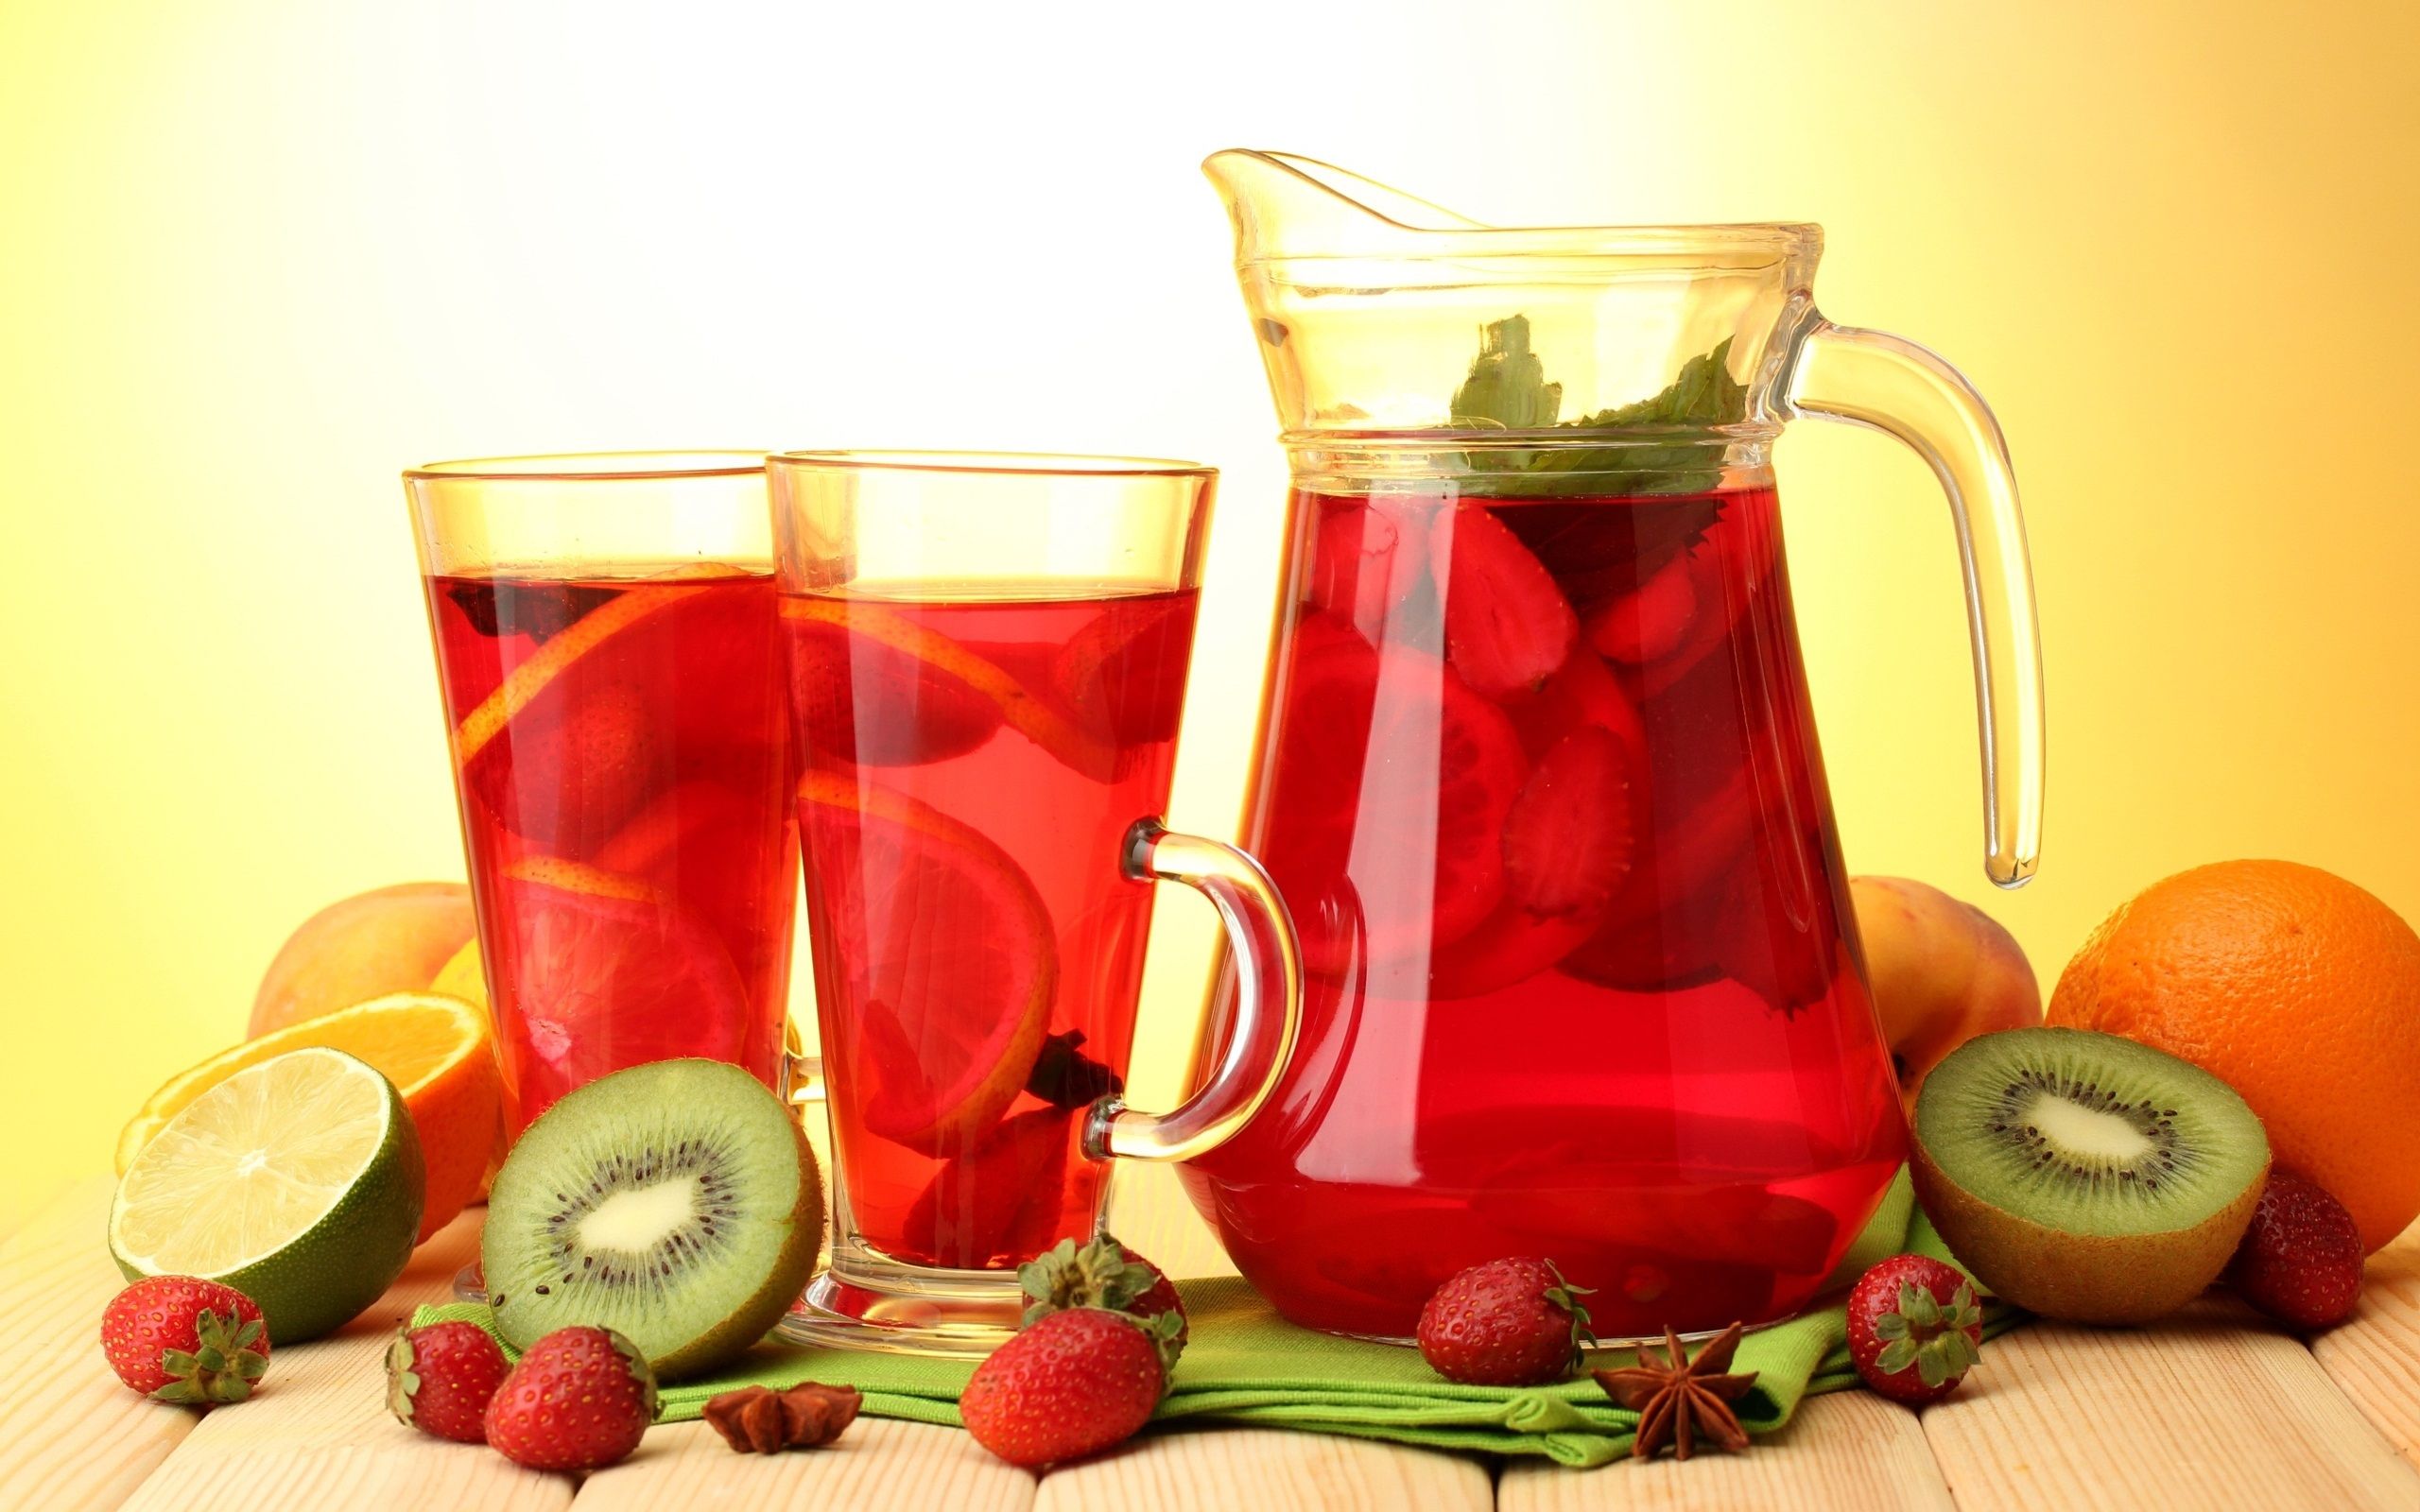 Juice HD Wallpaper Background For Free Download, BsnSCB Gallery